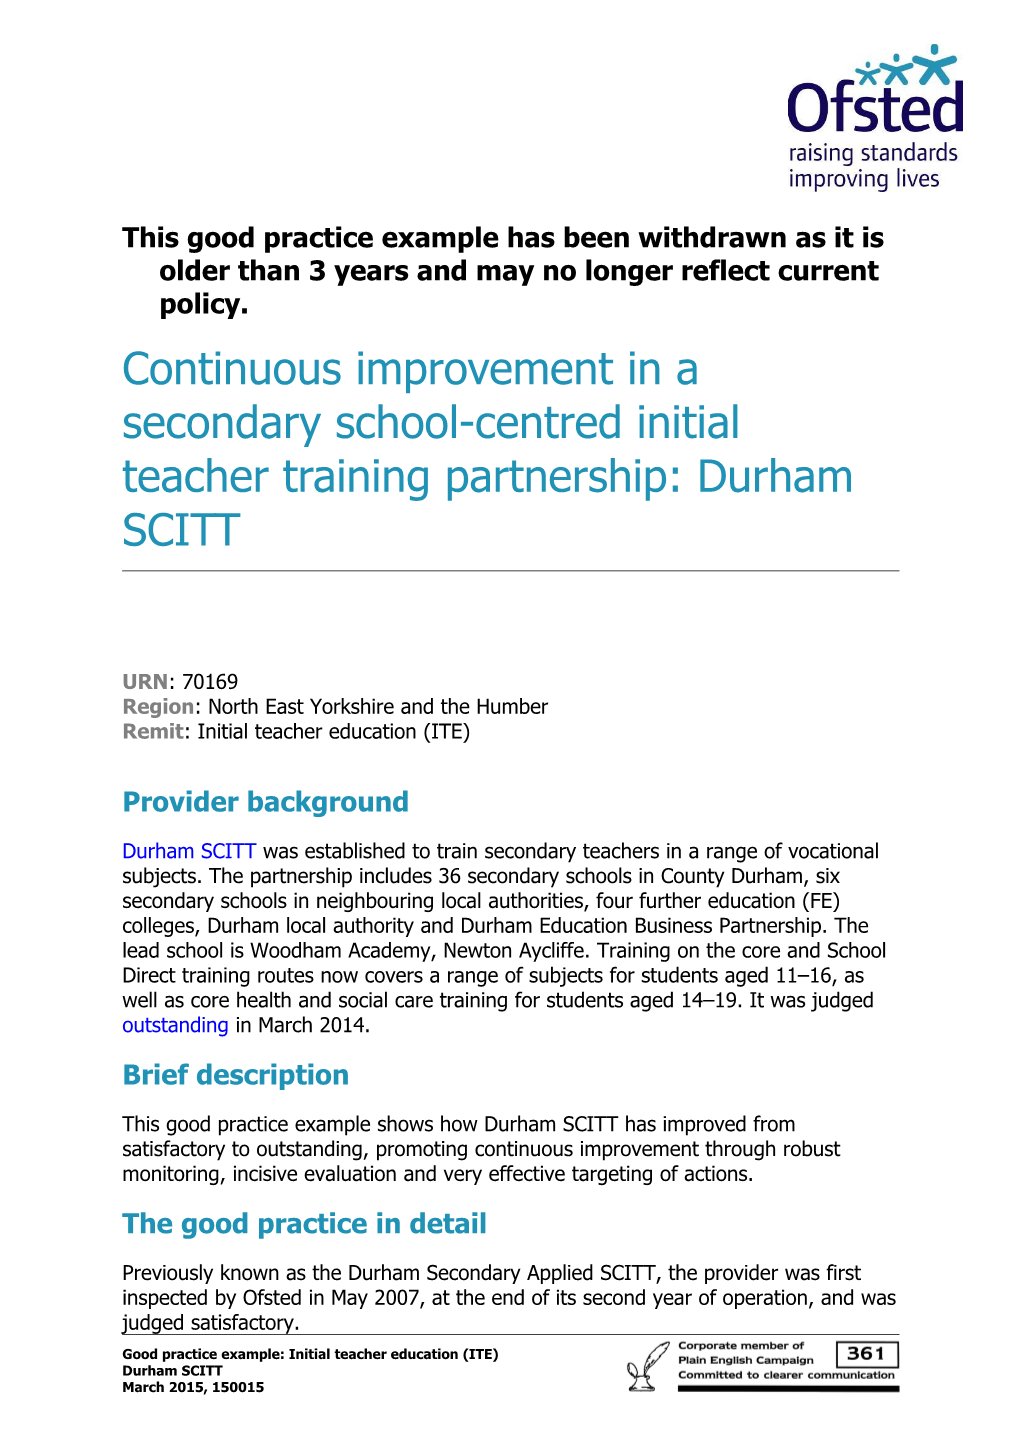 Continuous Improvement in a Secondary School-Centred Initial Teacher Training Partnership